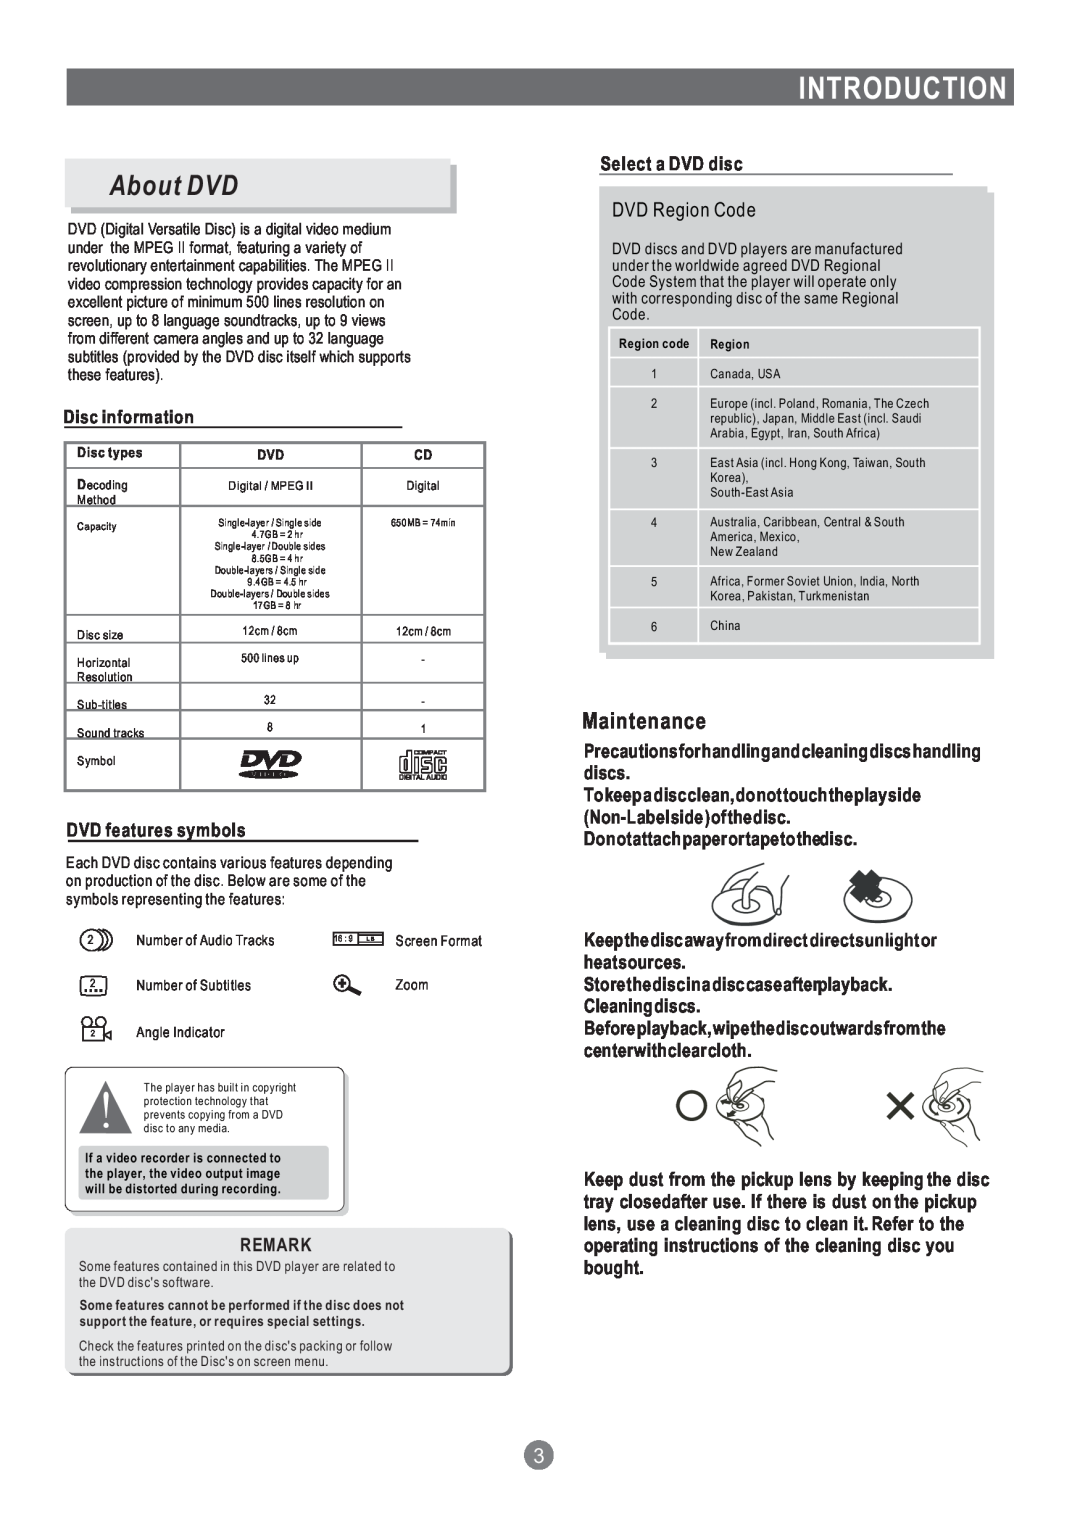 Grundig GDP 1600P manual Introduction, About DVD 